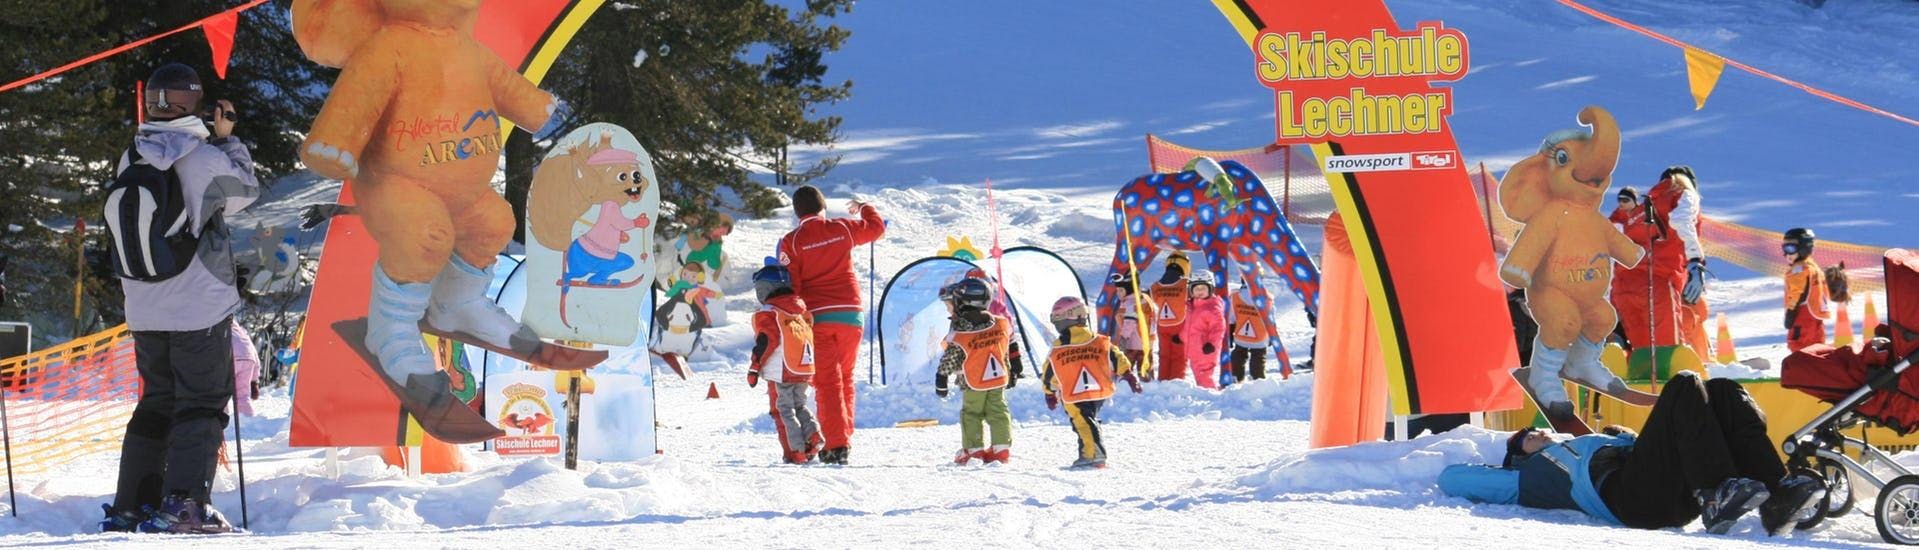 Several children are enjoying themselves in the Kinderland area during their kids ski lessons with the ski school Skischule Lechner in Zell am Ziller.